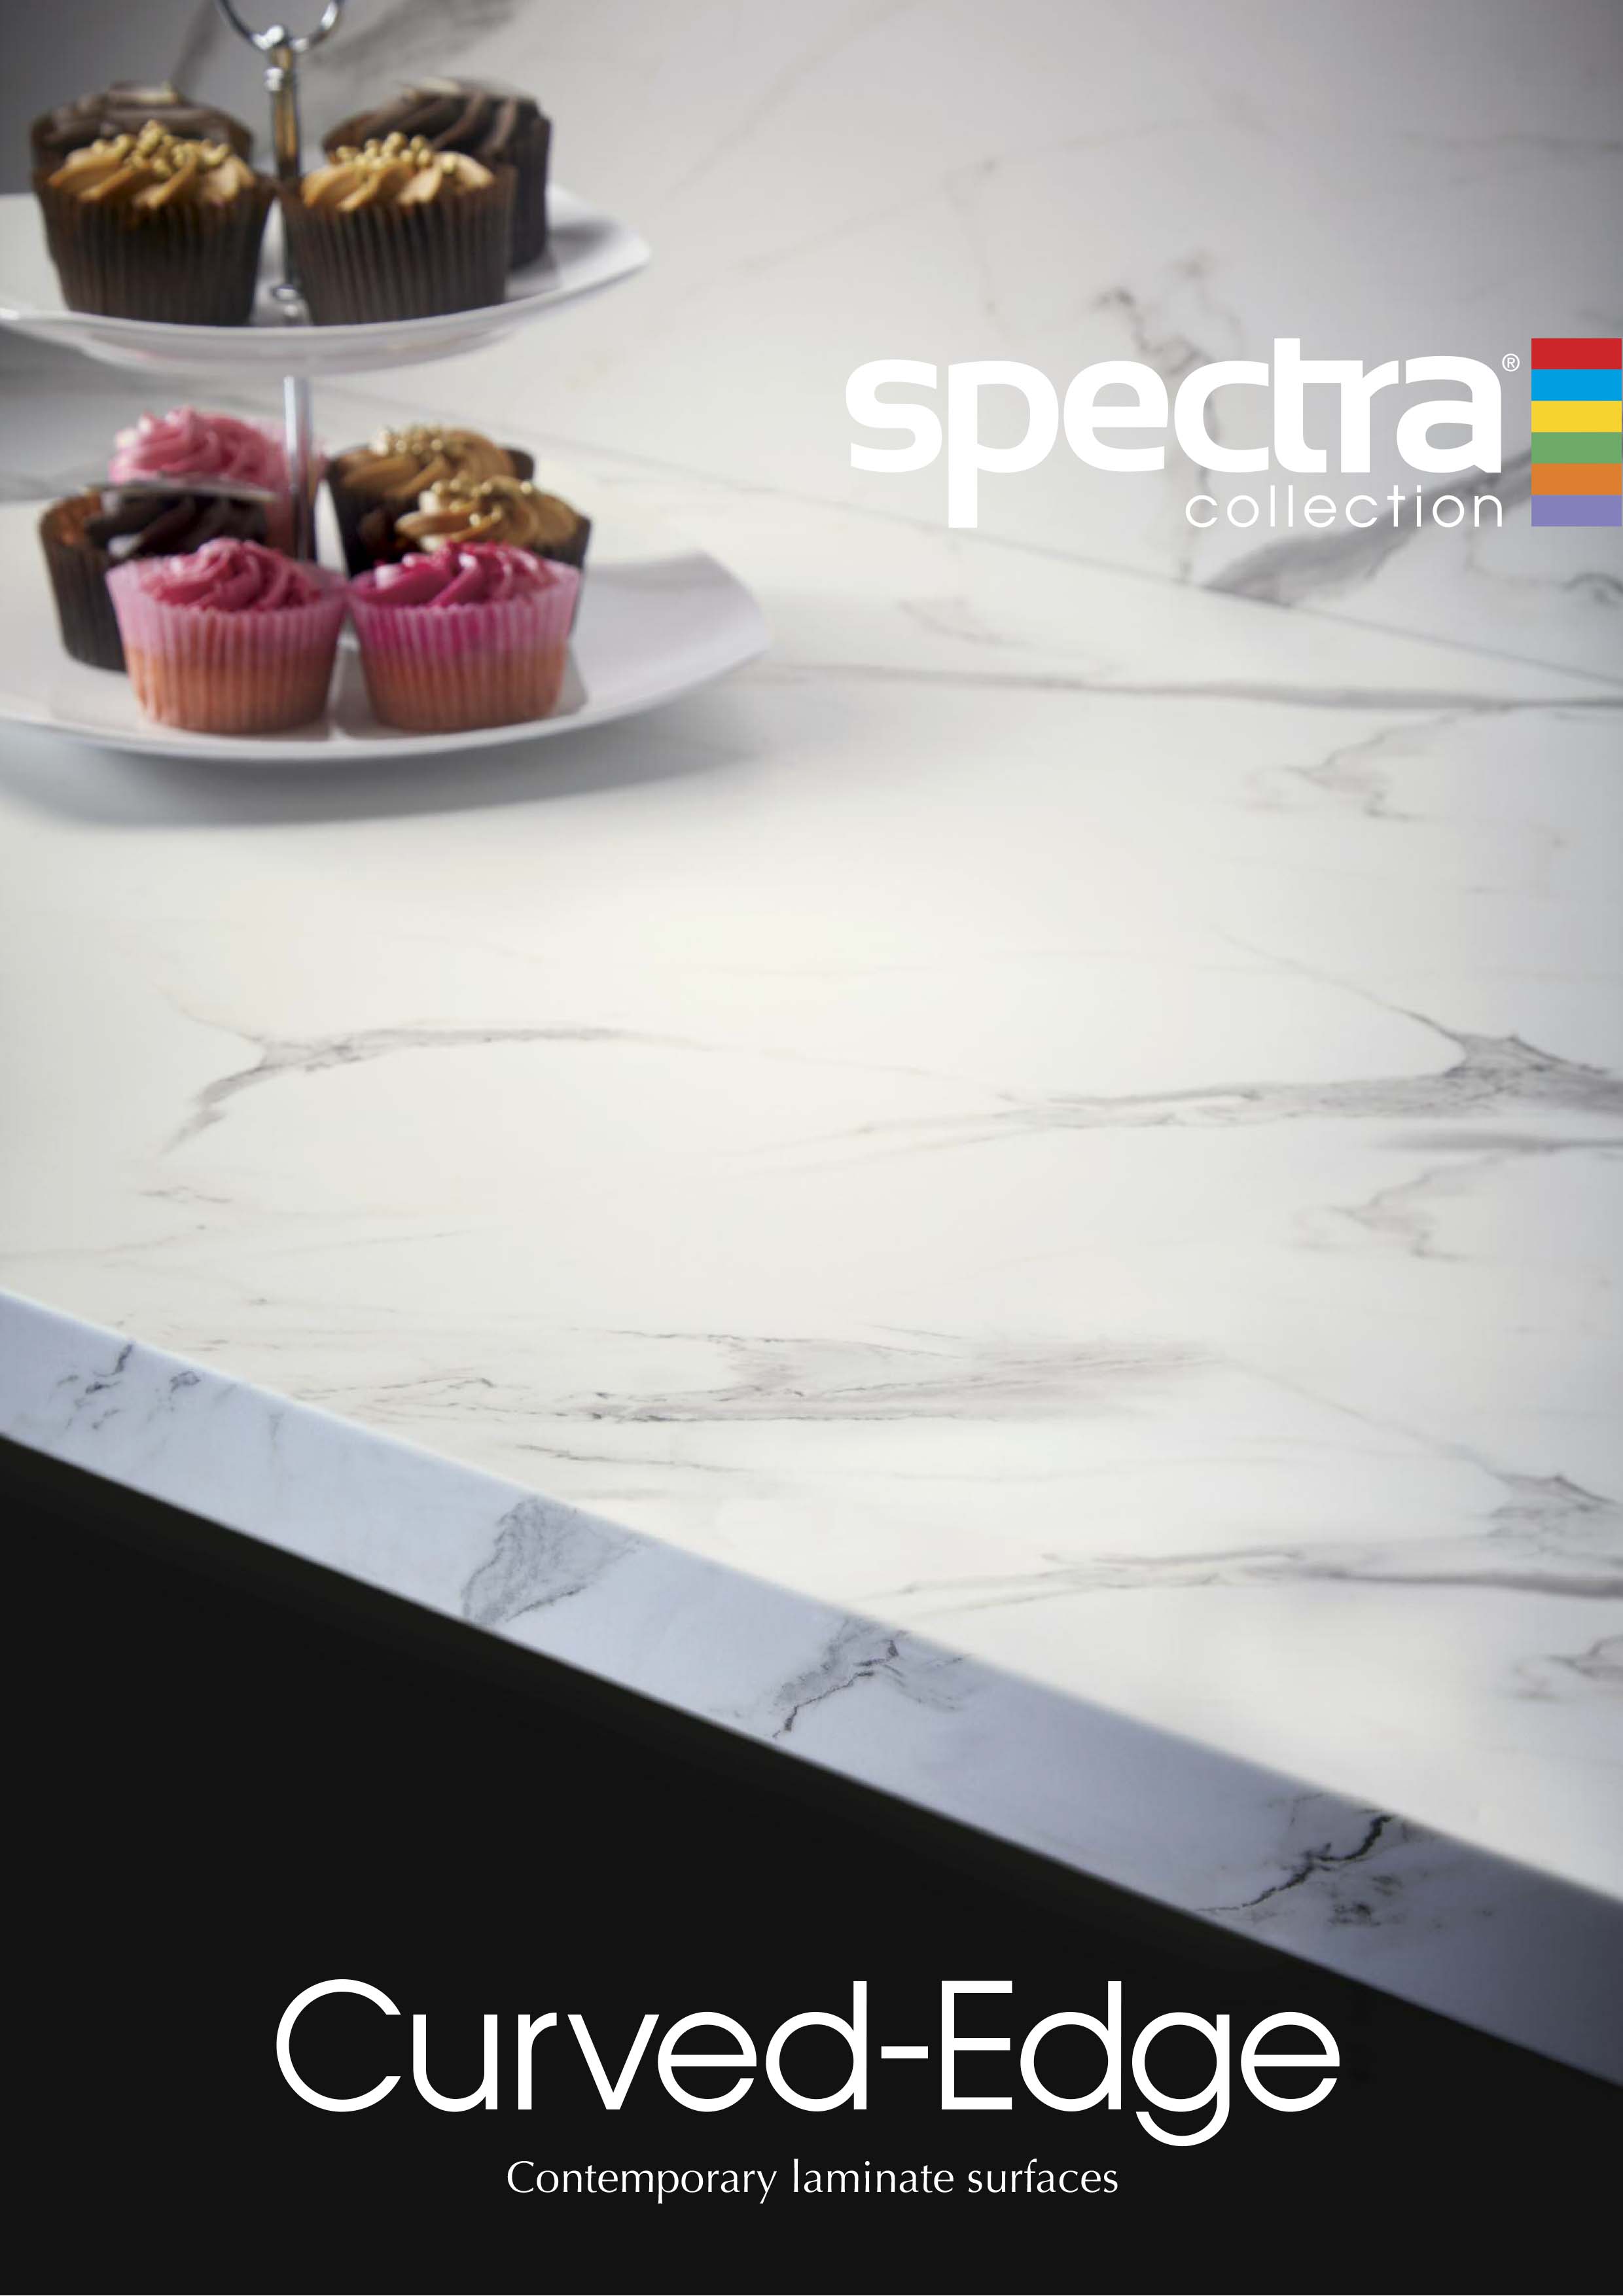 The new and updated Spectra Curved-Edge Collection is here!